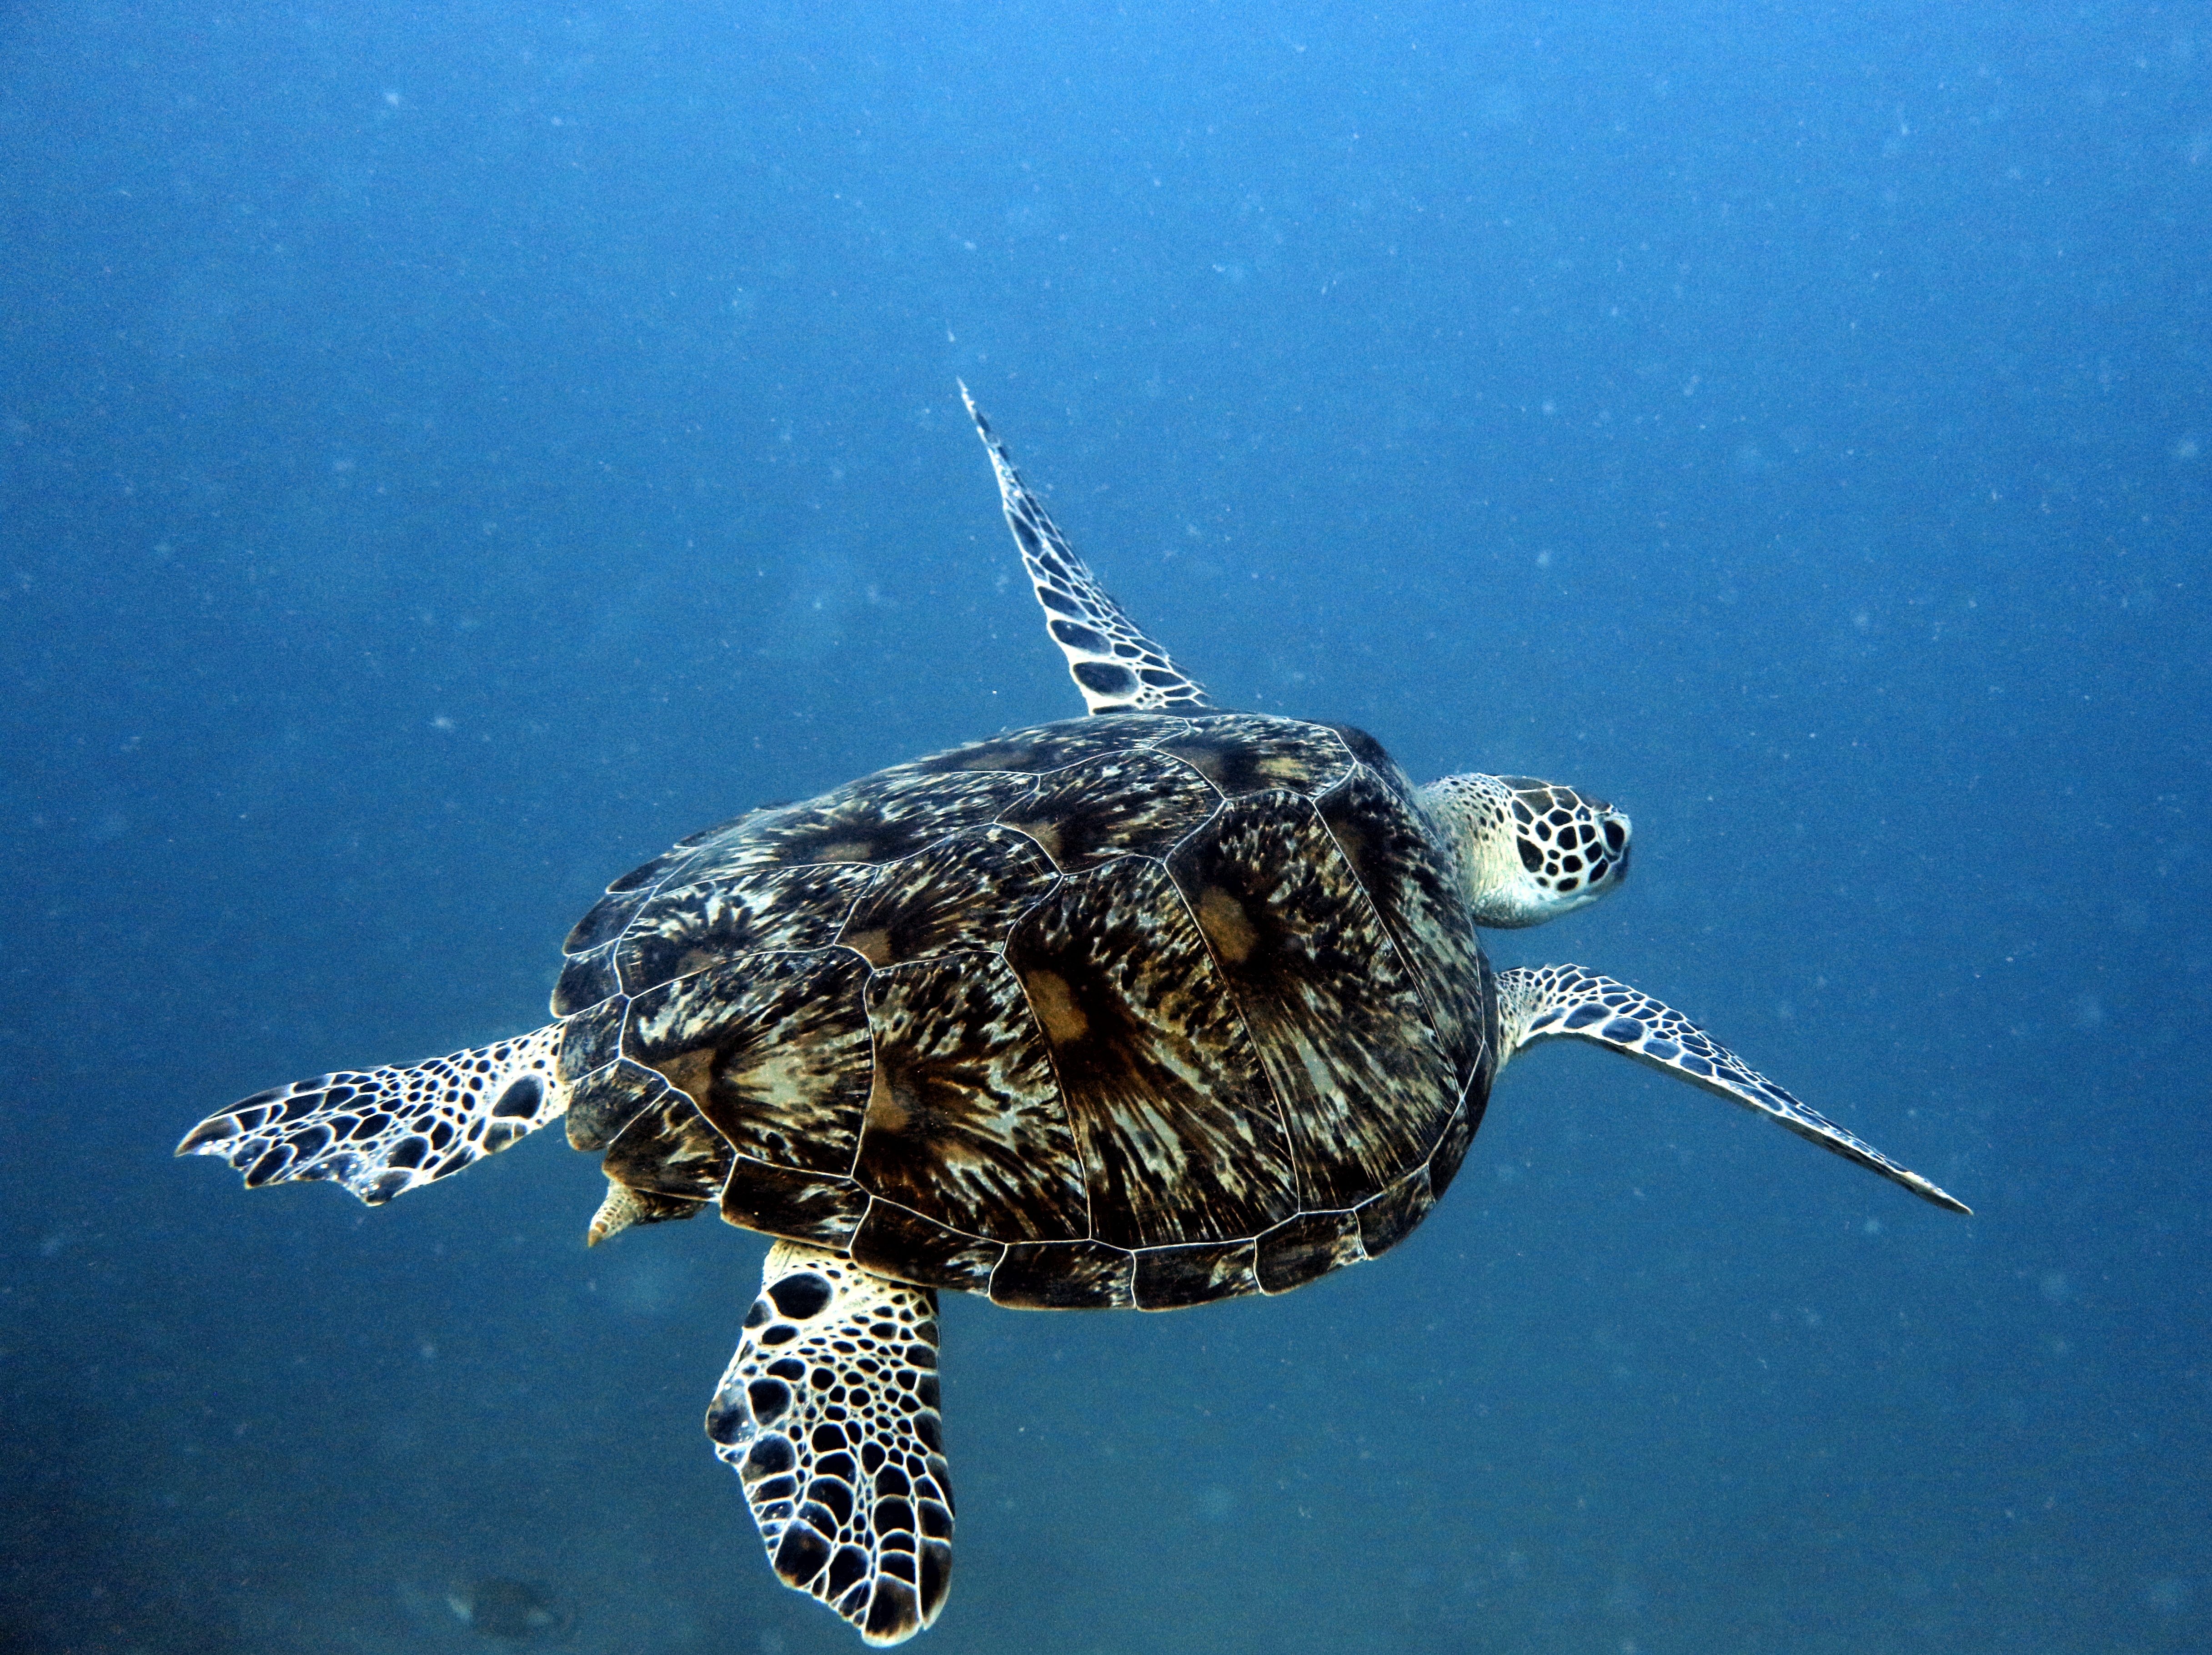 The Fly Sea Turtle